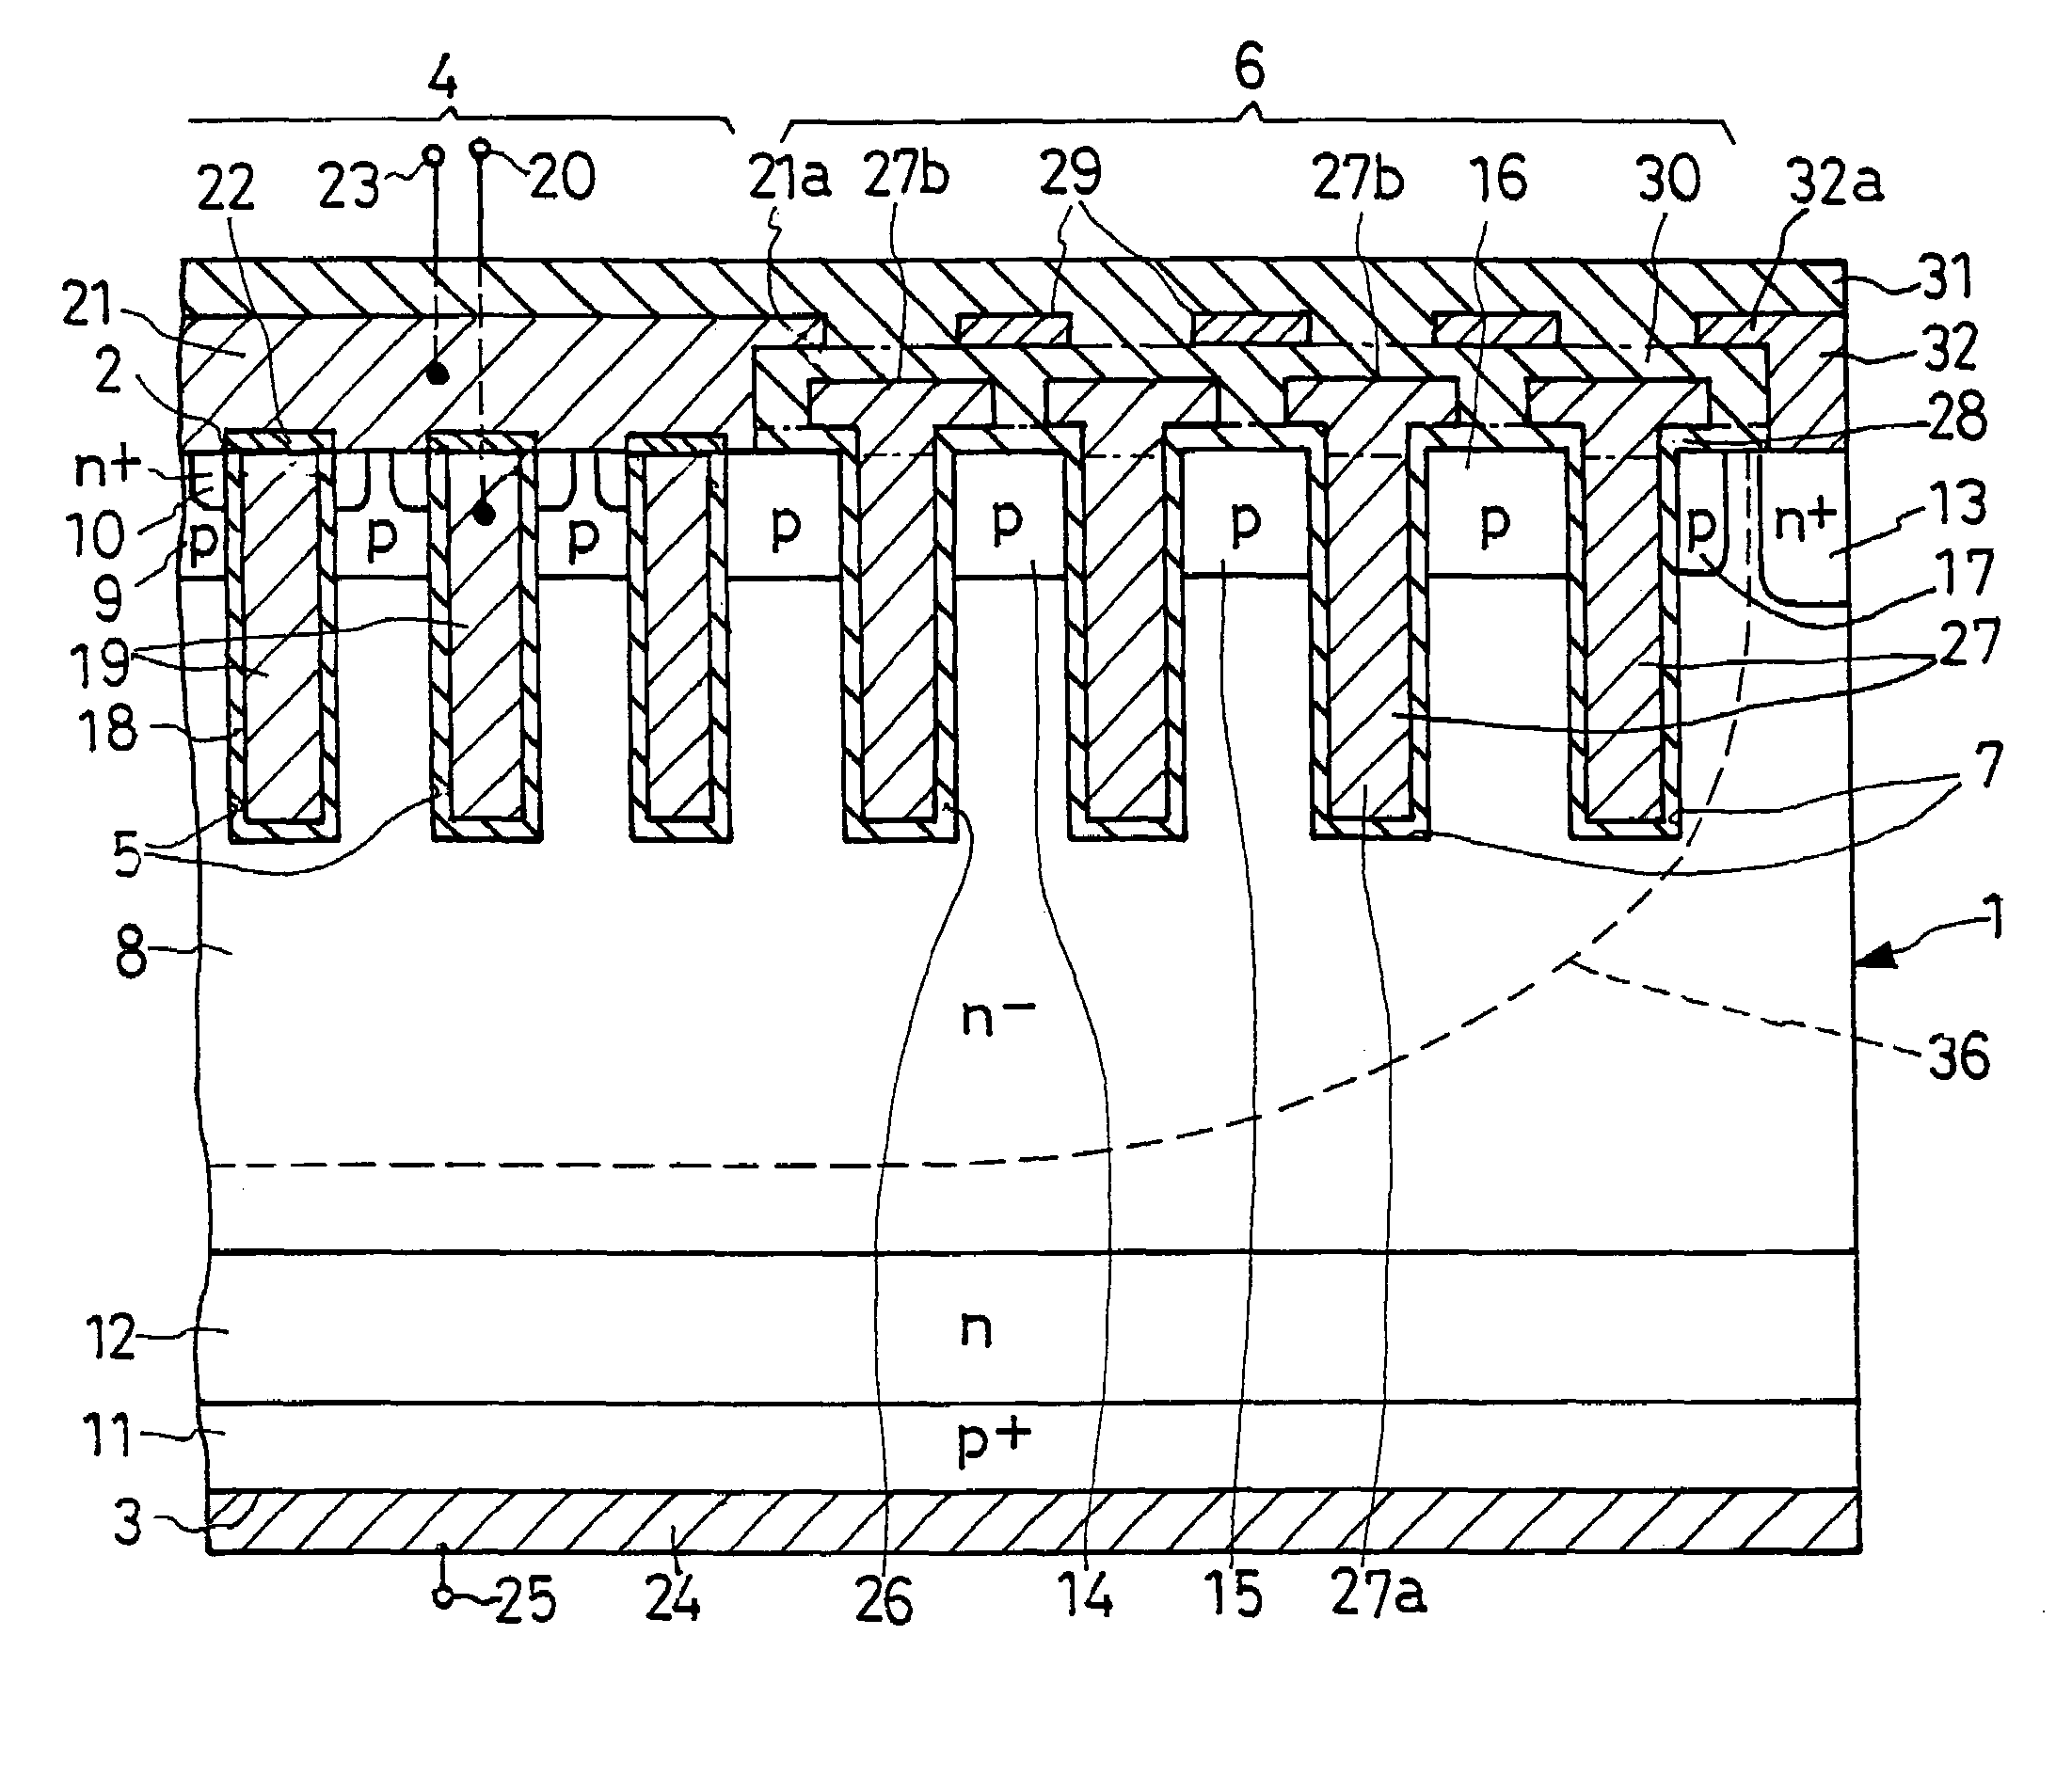 Trench semiconductor device of improved voltage strength, and method of fabrication